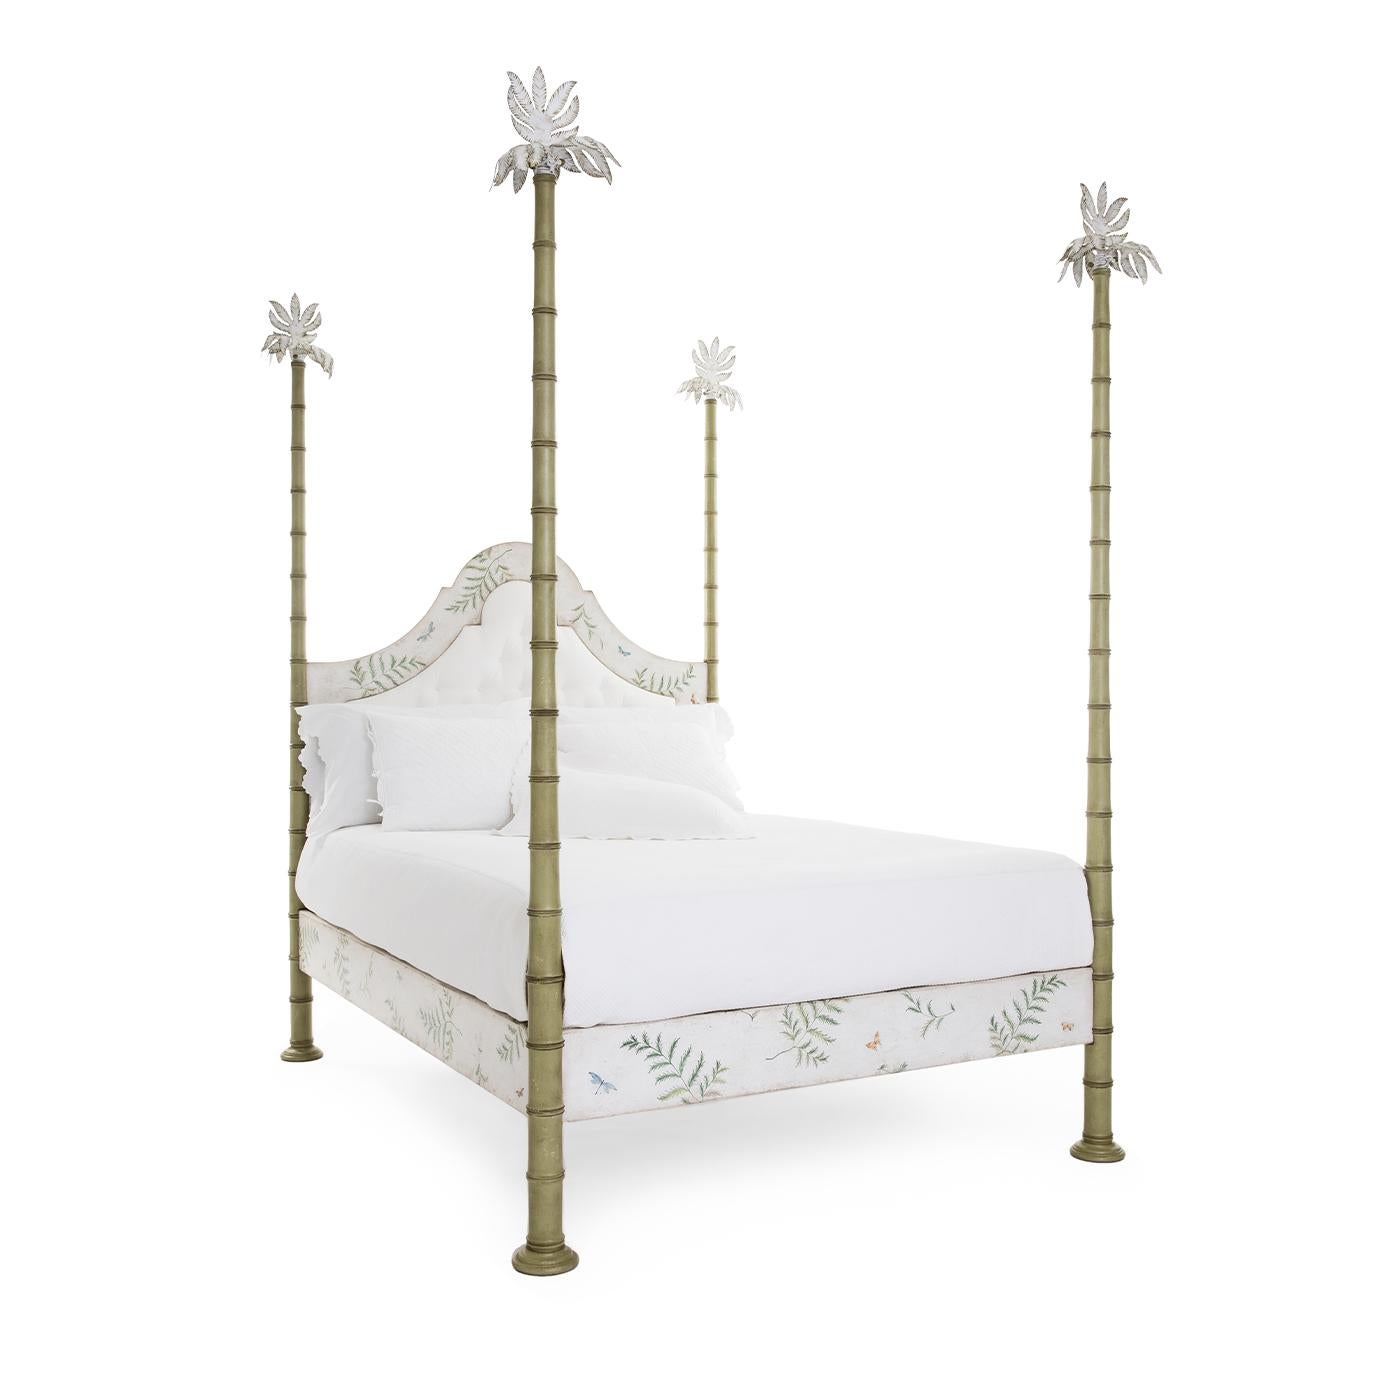 Contemporary Roma Apple Green Bamboo with Ferns and Butterflies Bed For Sale